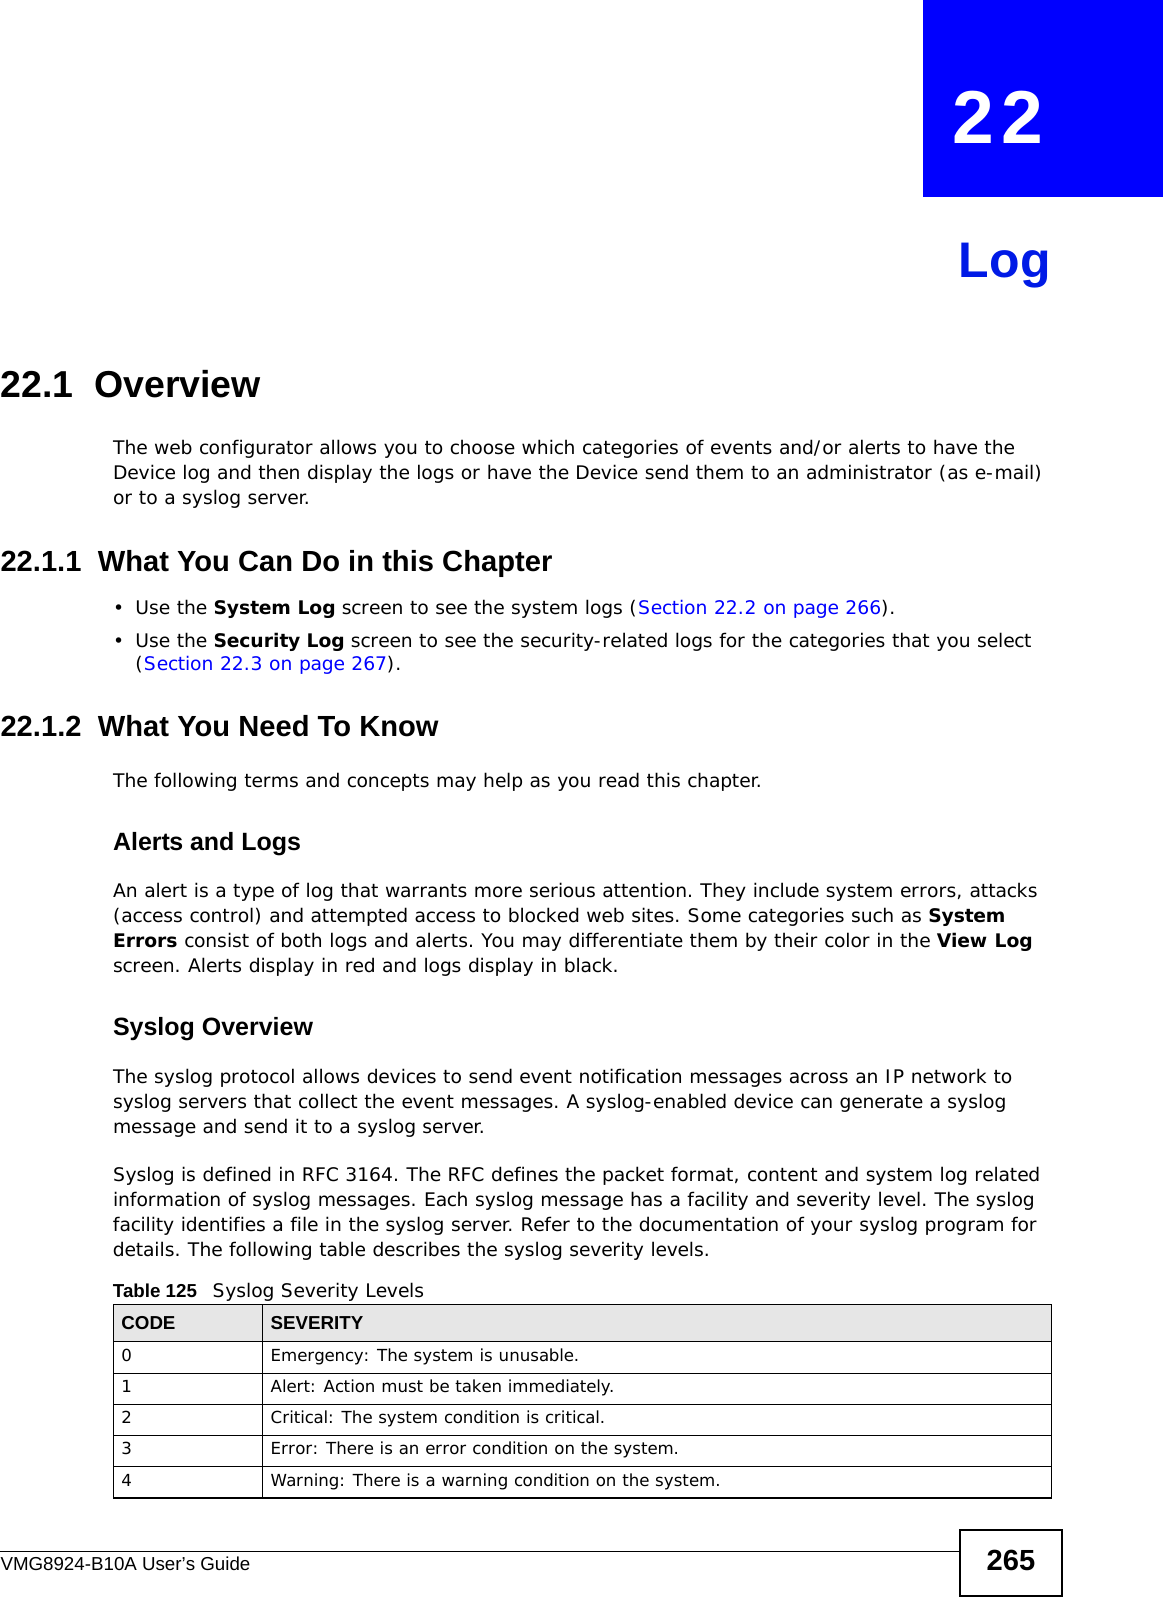 VMG8924-B10A User’s Guide 265CHAPTER   22Log22.1  OverviewThe web configurator allows you to choose which categories of events and/or alerts to have the Device log and then display the logs or have the Device send them to an administrator (as e-mail) or to a syslog server. 22.1.1  What You Can Do in this Chapter•Use the System Log screen to see the system logs (Section 22.2 on page 266).•Use the Security Log screen to see the security-related logs for the categories that you select (Section 22.3 on page 267).22.1.2  What You Need To KnowThe following terms and concepts may help as you read this chapter.Alerts and LogsAn alert is a type of log that warrants more serious attention. They include system errors, attacks (access control) and attempted access to blocked web sites. Some categories such as System Errors consist of both logs and alerts. You may differentiate them by their color in the View Log screen. Alerts display in red and logs display in black.Syslog Overview The syslog protocol allows devices to send event notification messages across an IP network to syslog servers that collect the event messages. A syslog-enabled device can generate a syslog message and send it to a syslog server.Syslog is defined in RFC 3164. The RFC defines the packet format, content and system log related information of syslog messages. Each syslog message has a facility and severity level. The syslog facility identifies a file in the syslog server. Refer to the documentation of your syslog program for details. The following table describes the syslog severity levels. Table 125   Syslog Severity LevelsCODE SEVERITY0 Emergency: The system is unusable.1 Alert: Action must be taken immediately.2 Critical: The system condition is critical.3 Error: There is an error condition on the system.4 Warning: There is a warning condition on the system.